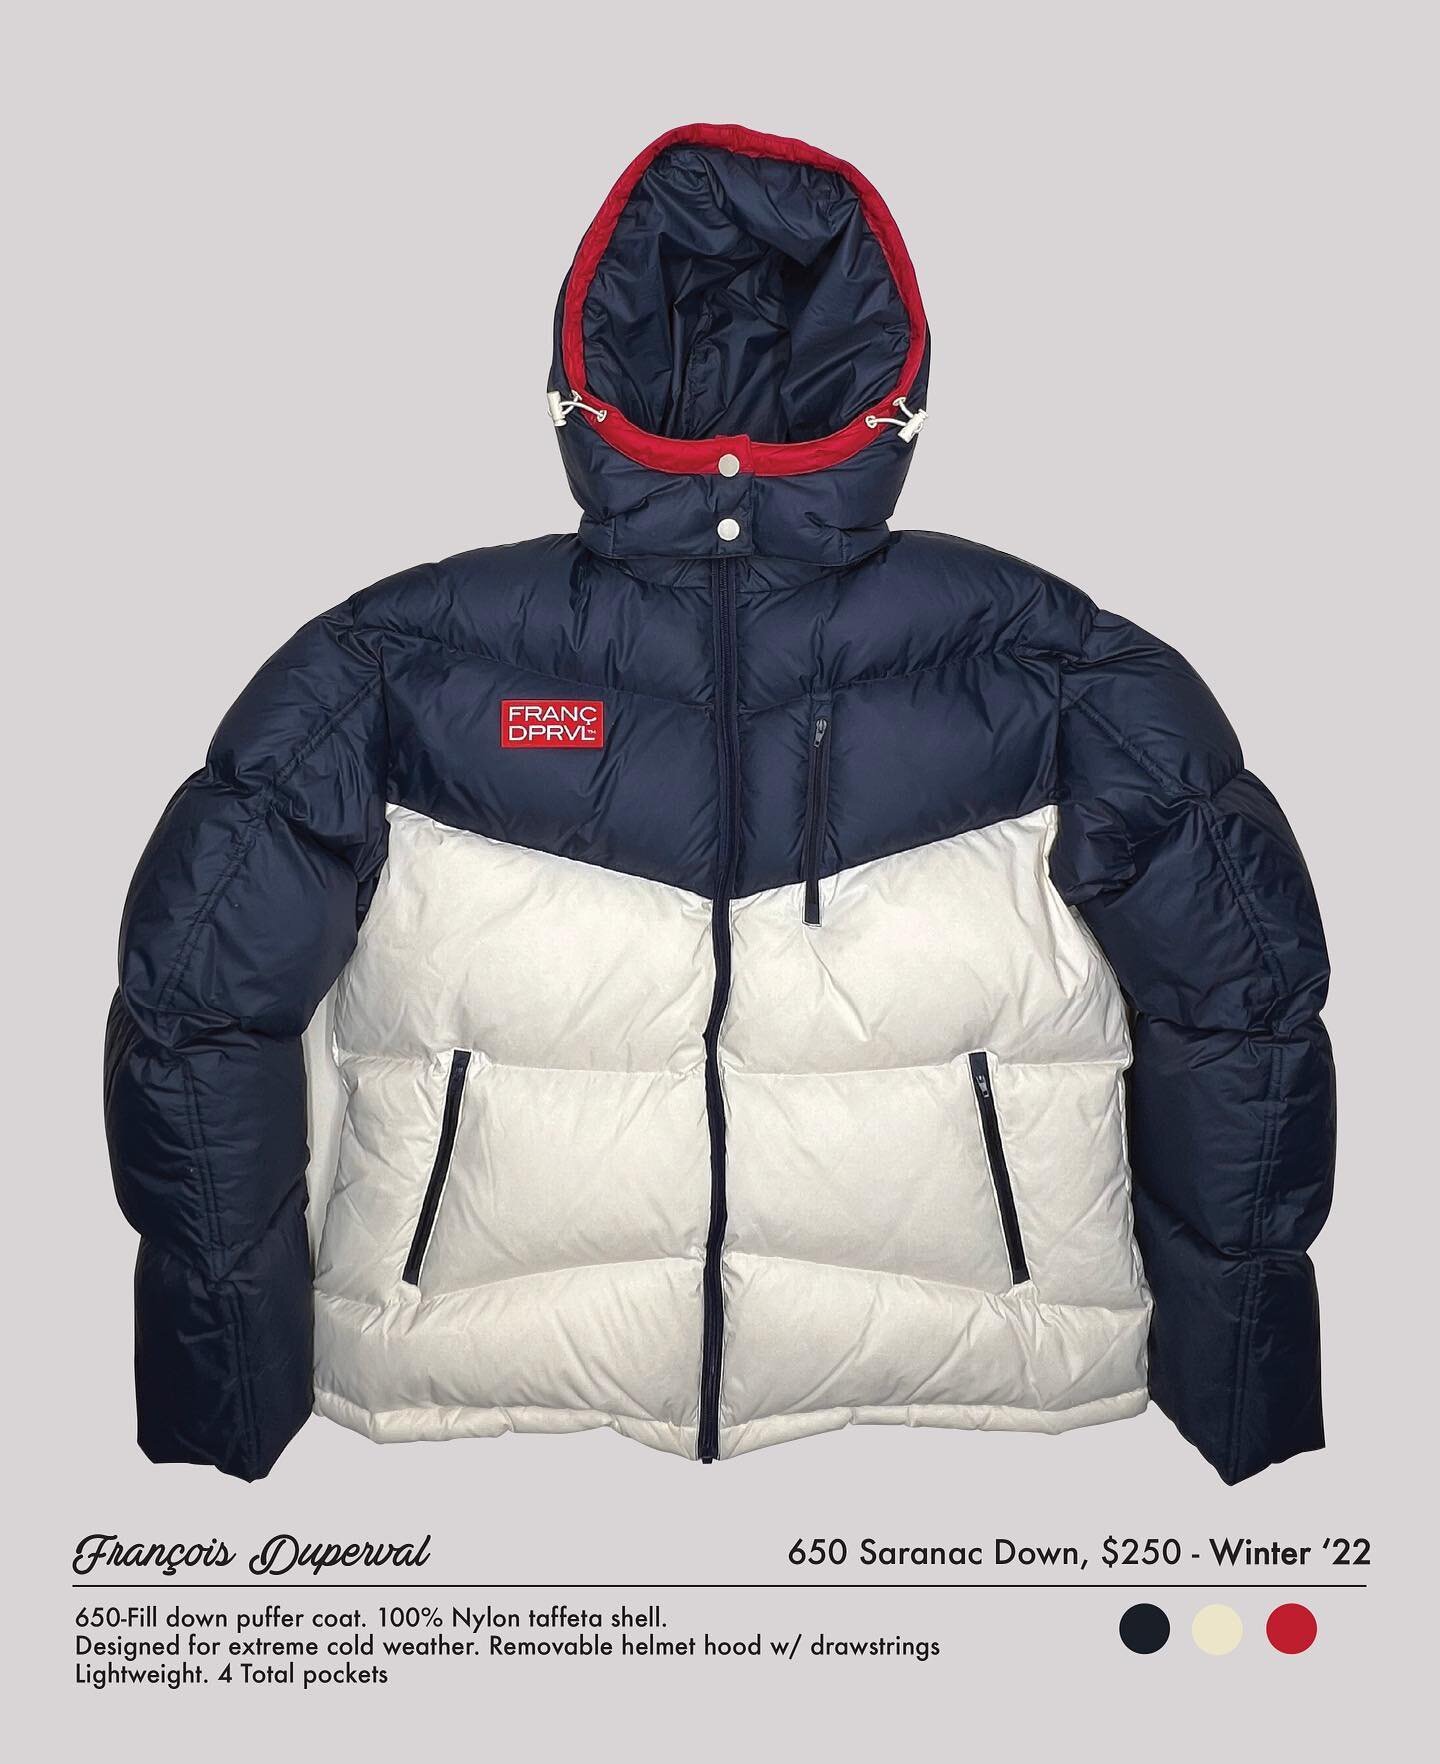 The Fran&ccedil;ois Duperval Lifestyle brand formally introduces the Saranac 650 Down puffer jacket from its Winter 22 collection. 

This lightweight jacket packs a powerful punch by featuring a weather treated 100% nylon taffeta shell with a logo em